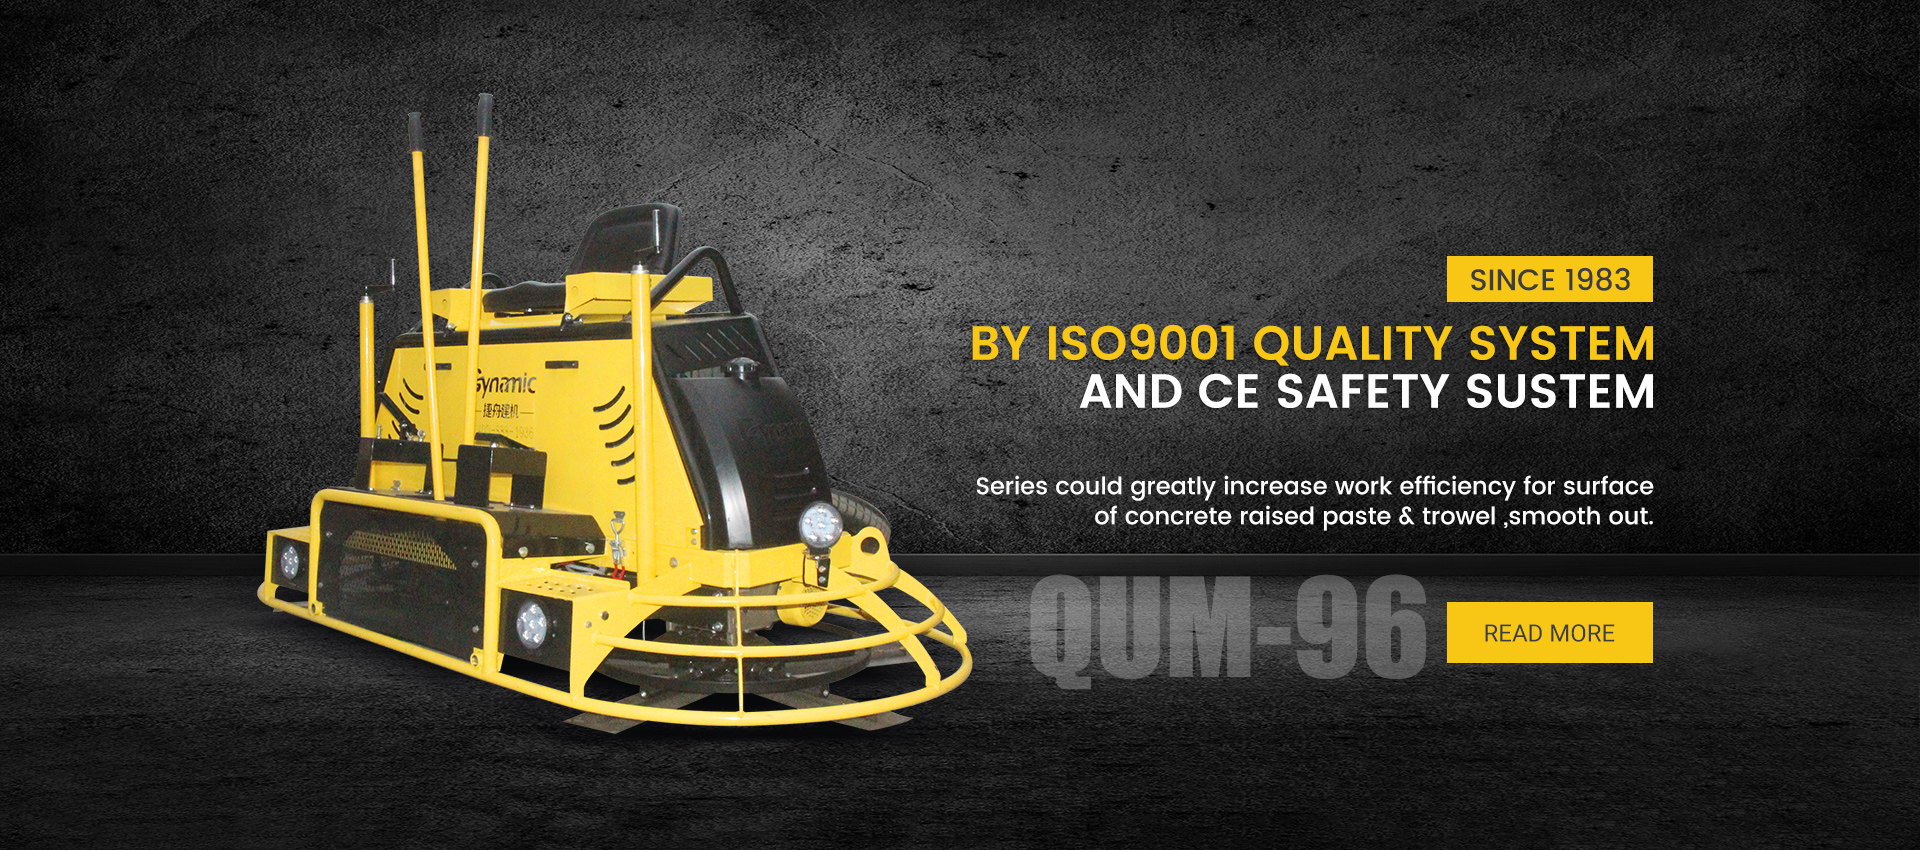 QJM-800 30 inches/800mm Walk-Behind Power Trowel Optional gasoline engine and motor